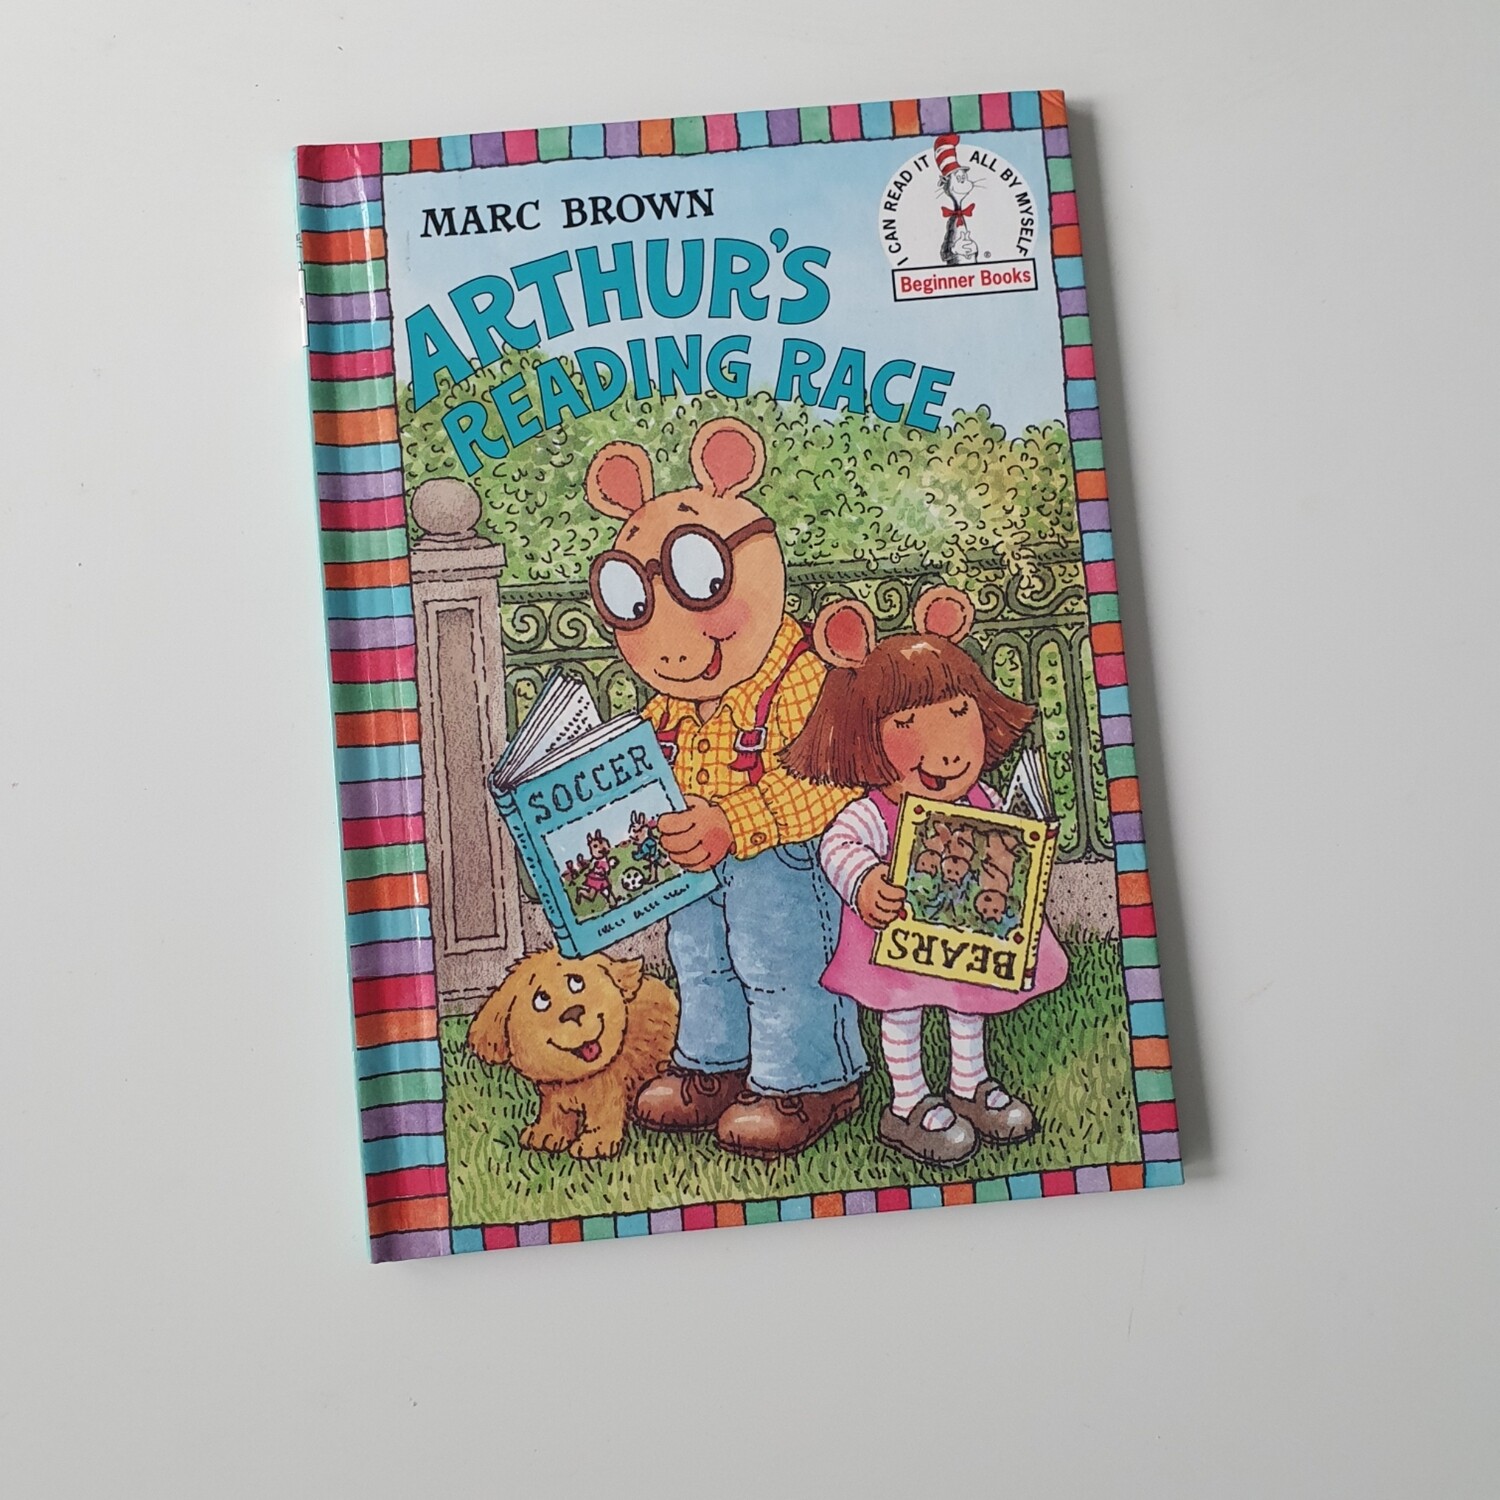 Arthur's Reading place - book review, library 1996